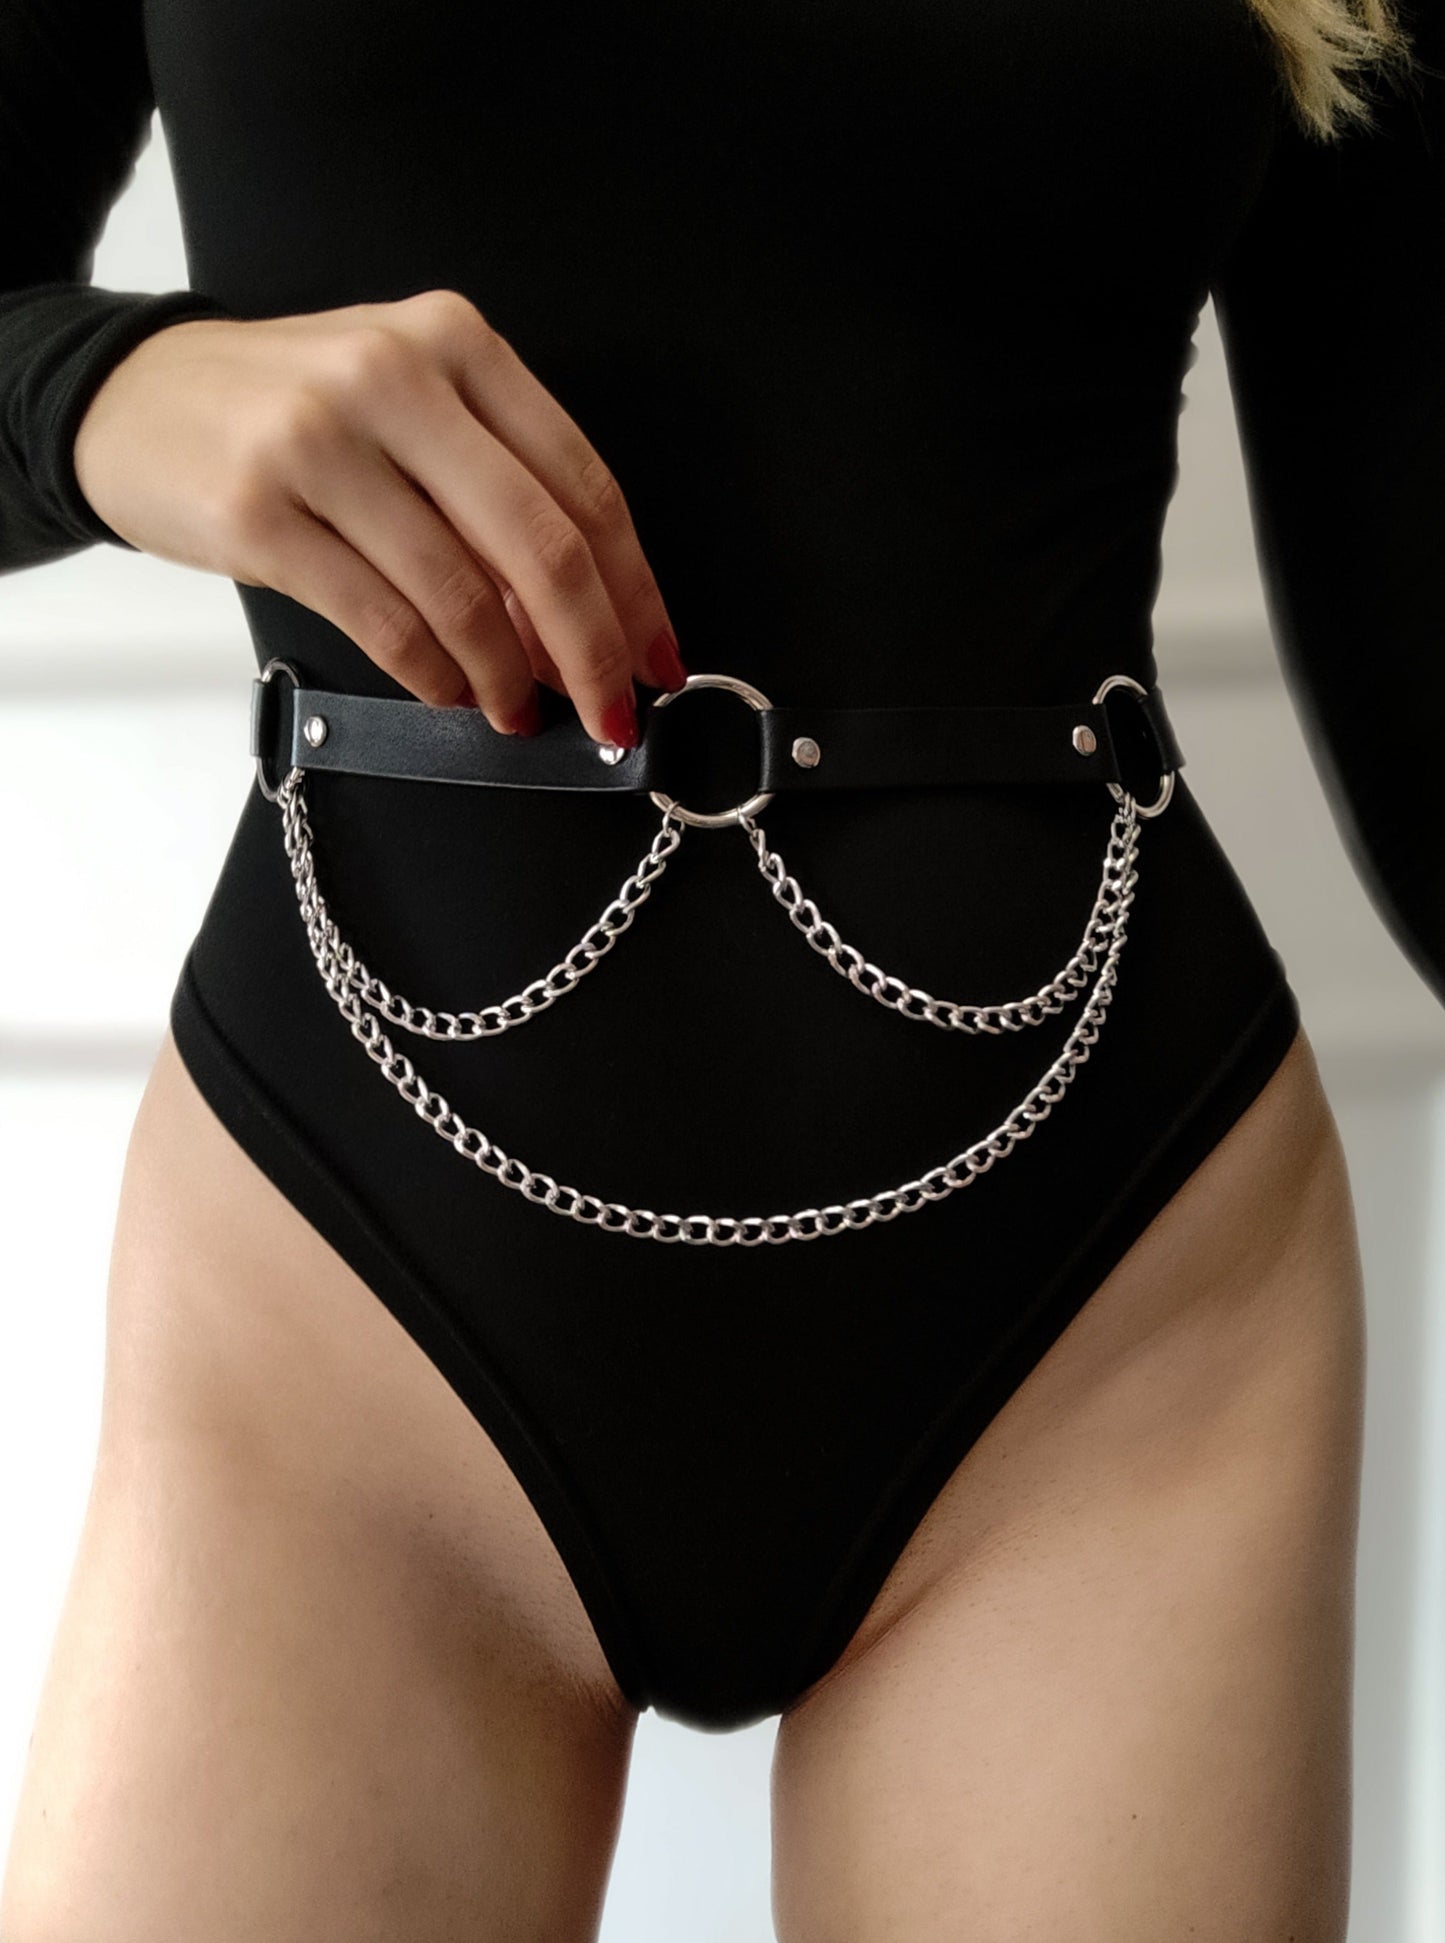 Leather Waist Belt Harness with Sexy Chains No. 23